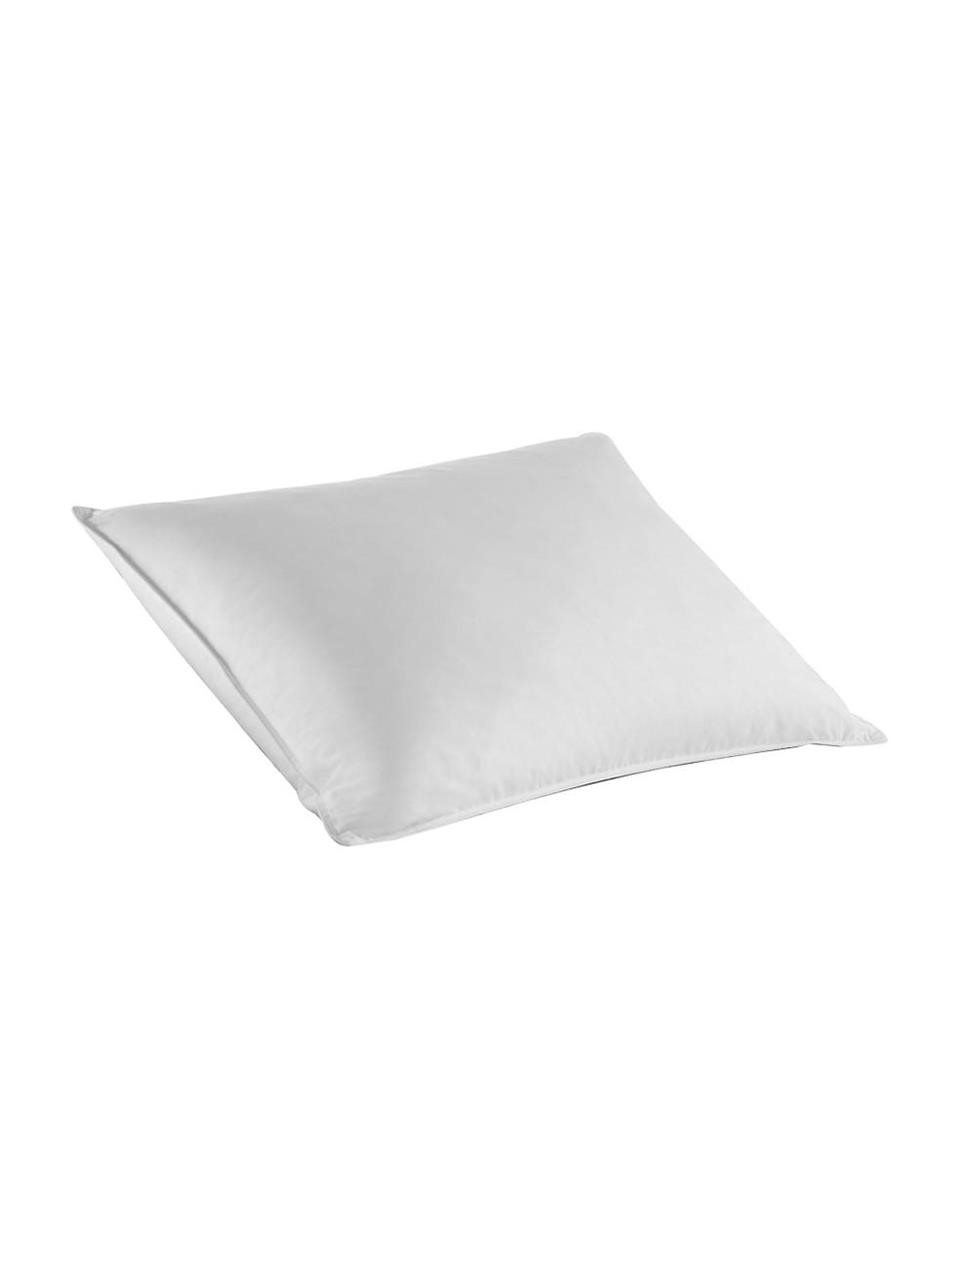 NEW $46 (Q) Bed Pillow